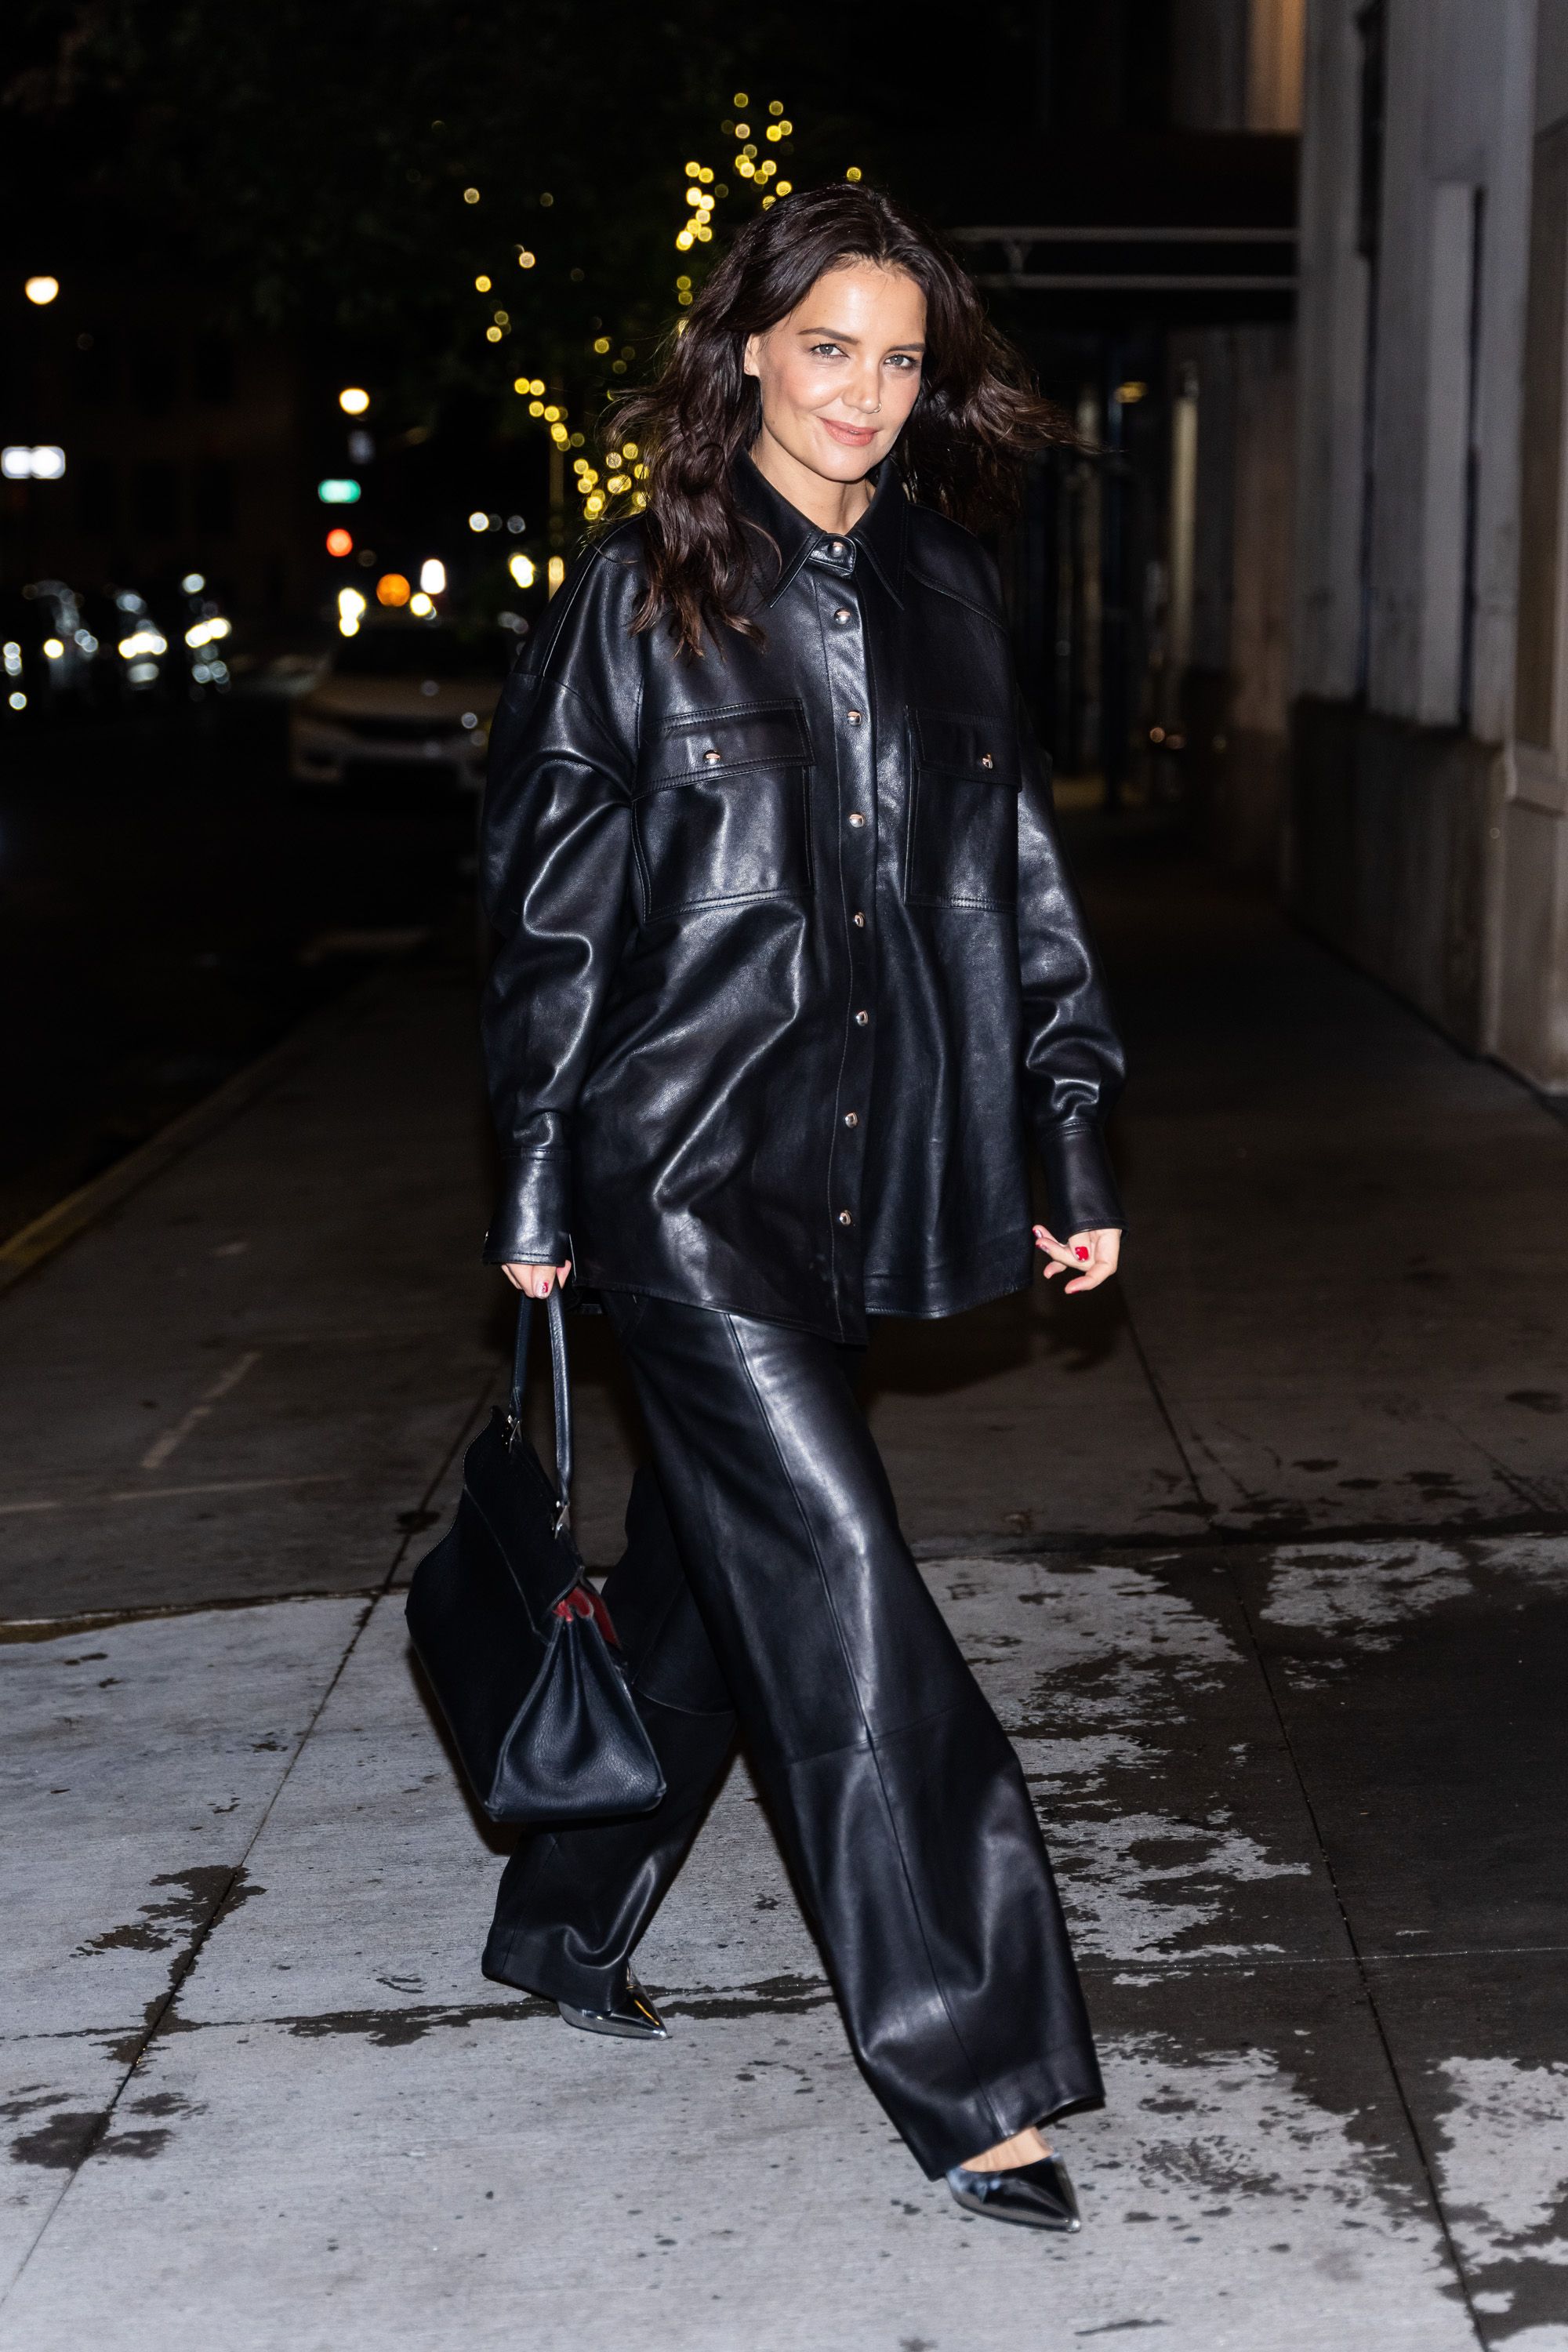 Kendall Jenner Beverly Hills April 24, 2019 – Star Style